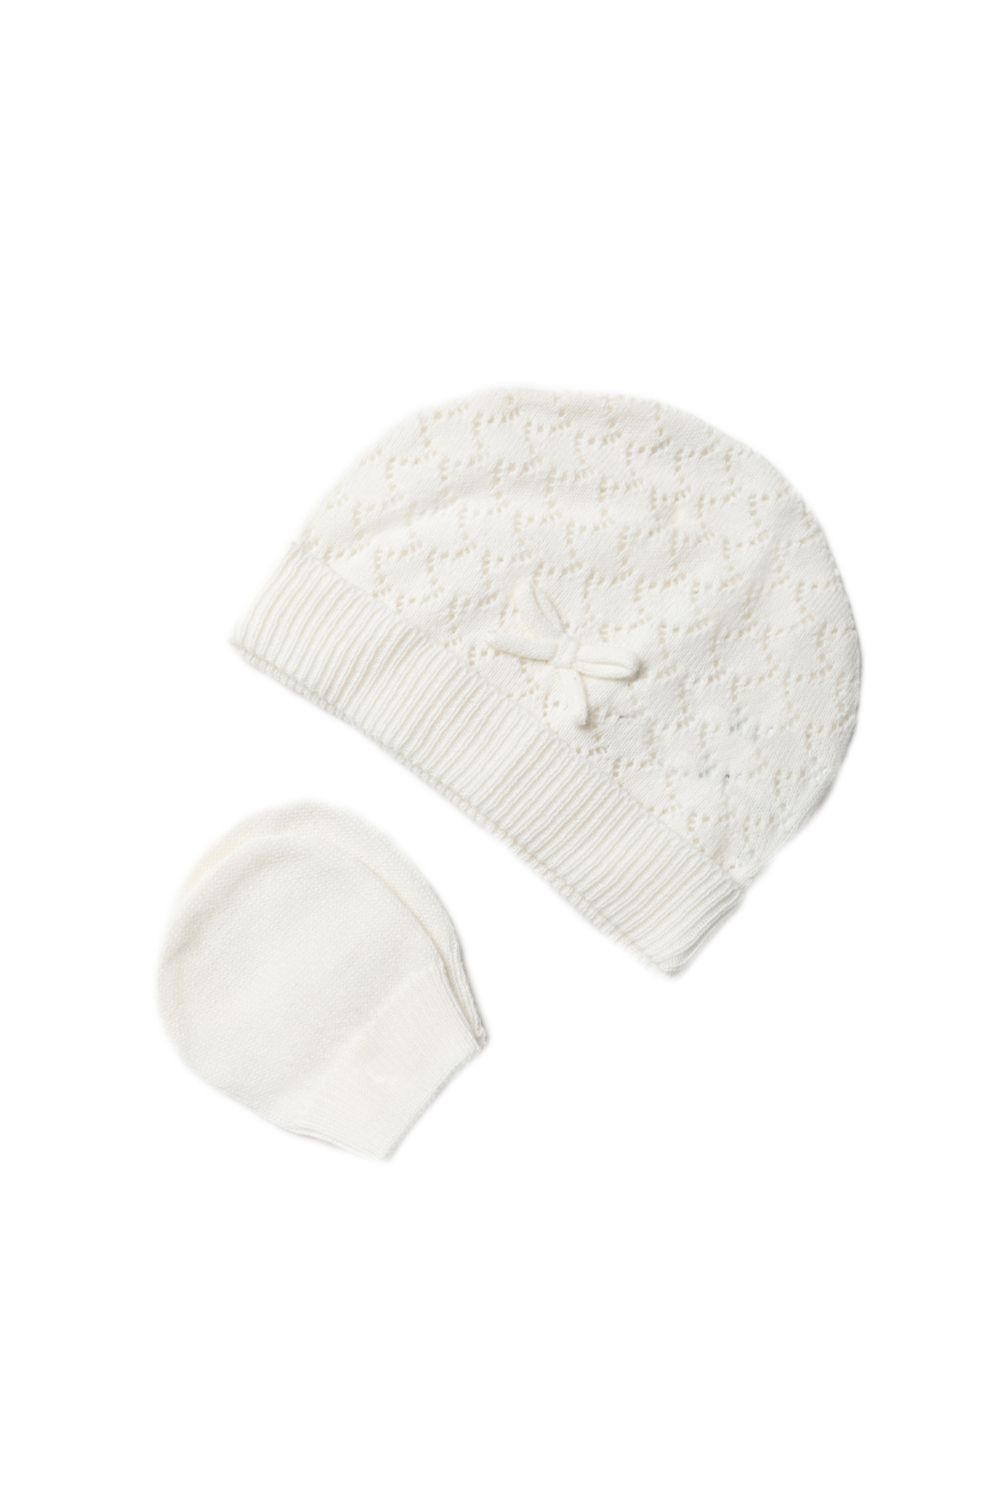 This Rock A Bye Baby Boutique four-piece set features a knitted jumper, bottoms, a hat, and mitts. The knitted cardigan has an adorable bow motif, matching the hat. The trousers are matching, with an elasticated waistband. This piece is perfect for keeping your little one comfortable and cosy. The Rock a Bye Baby Boutique line aims to offer a specialty baby collection with adorable detailing and comes in lovely, boxed packaging, making this a lovely gift for the little one in your life.